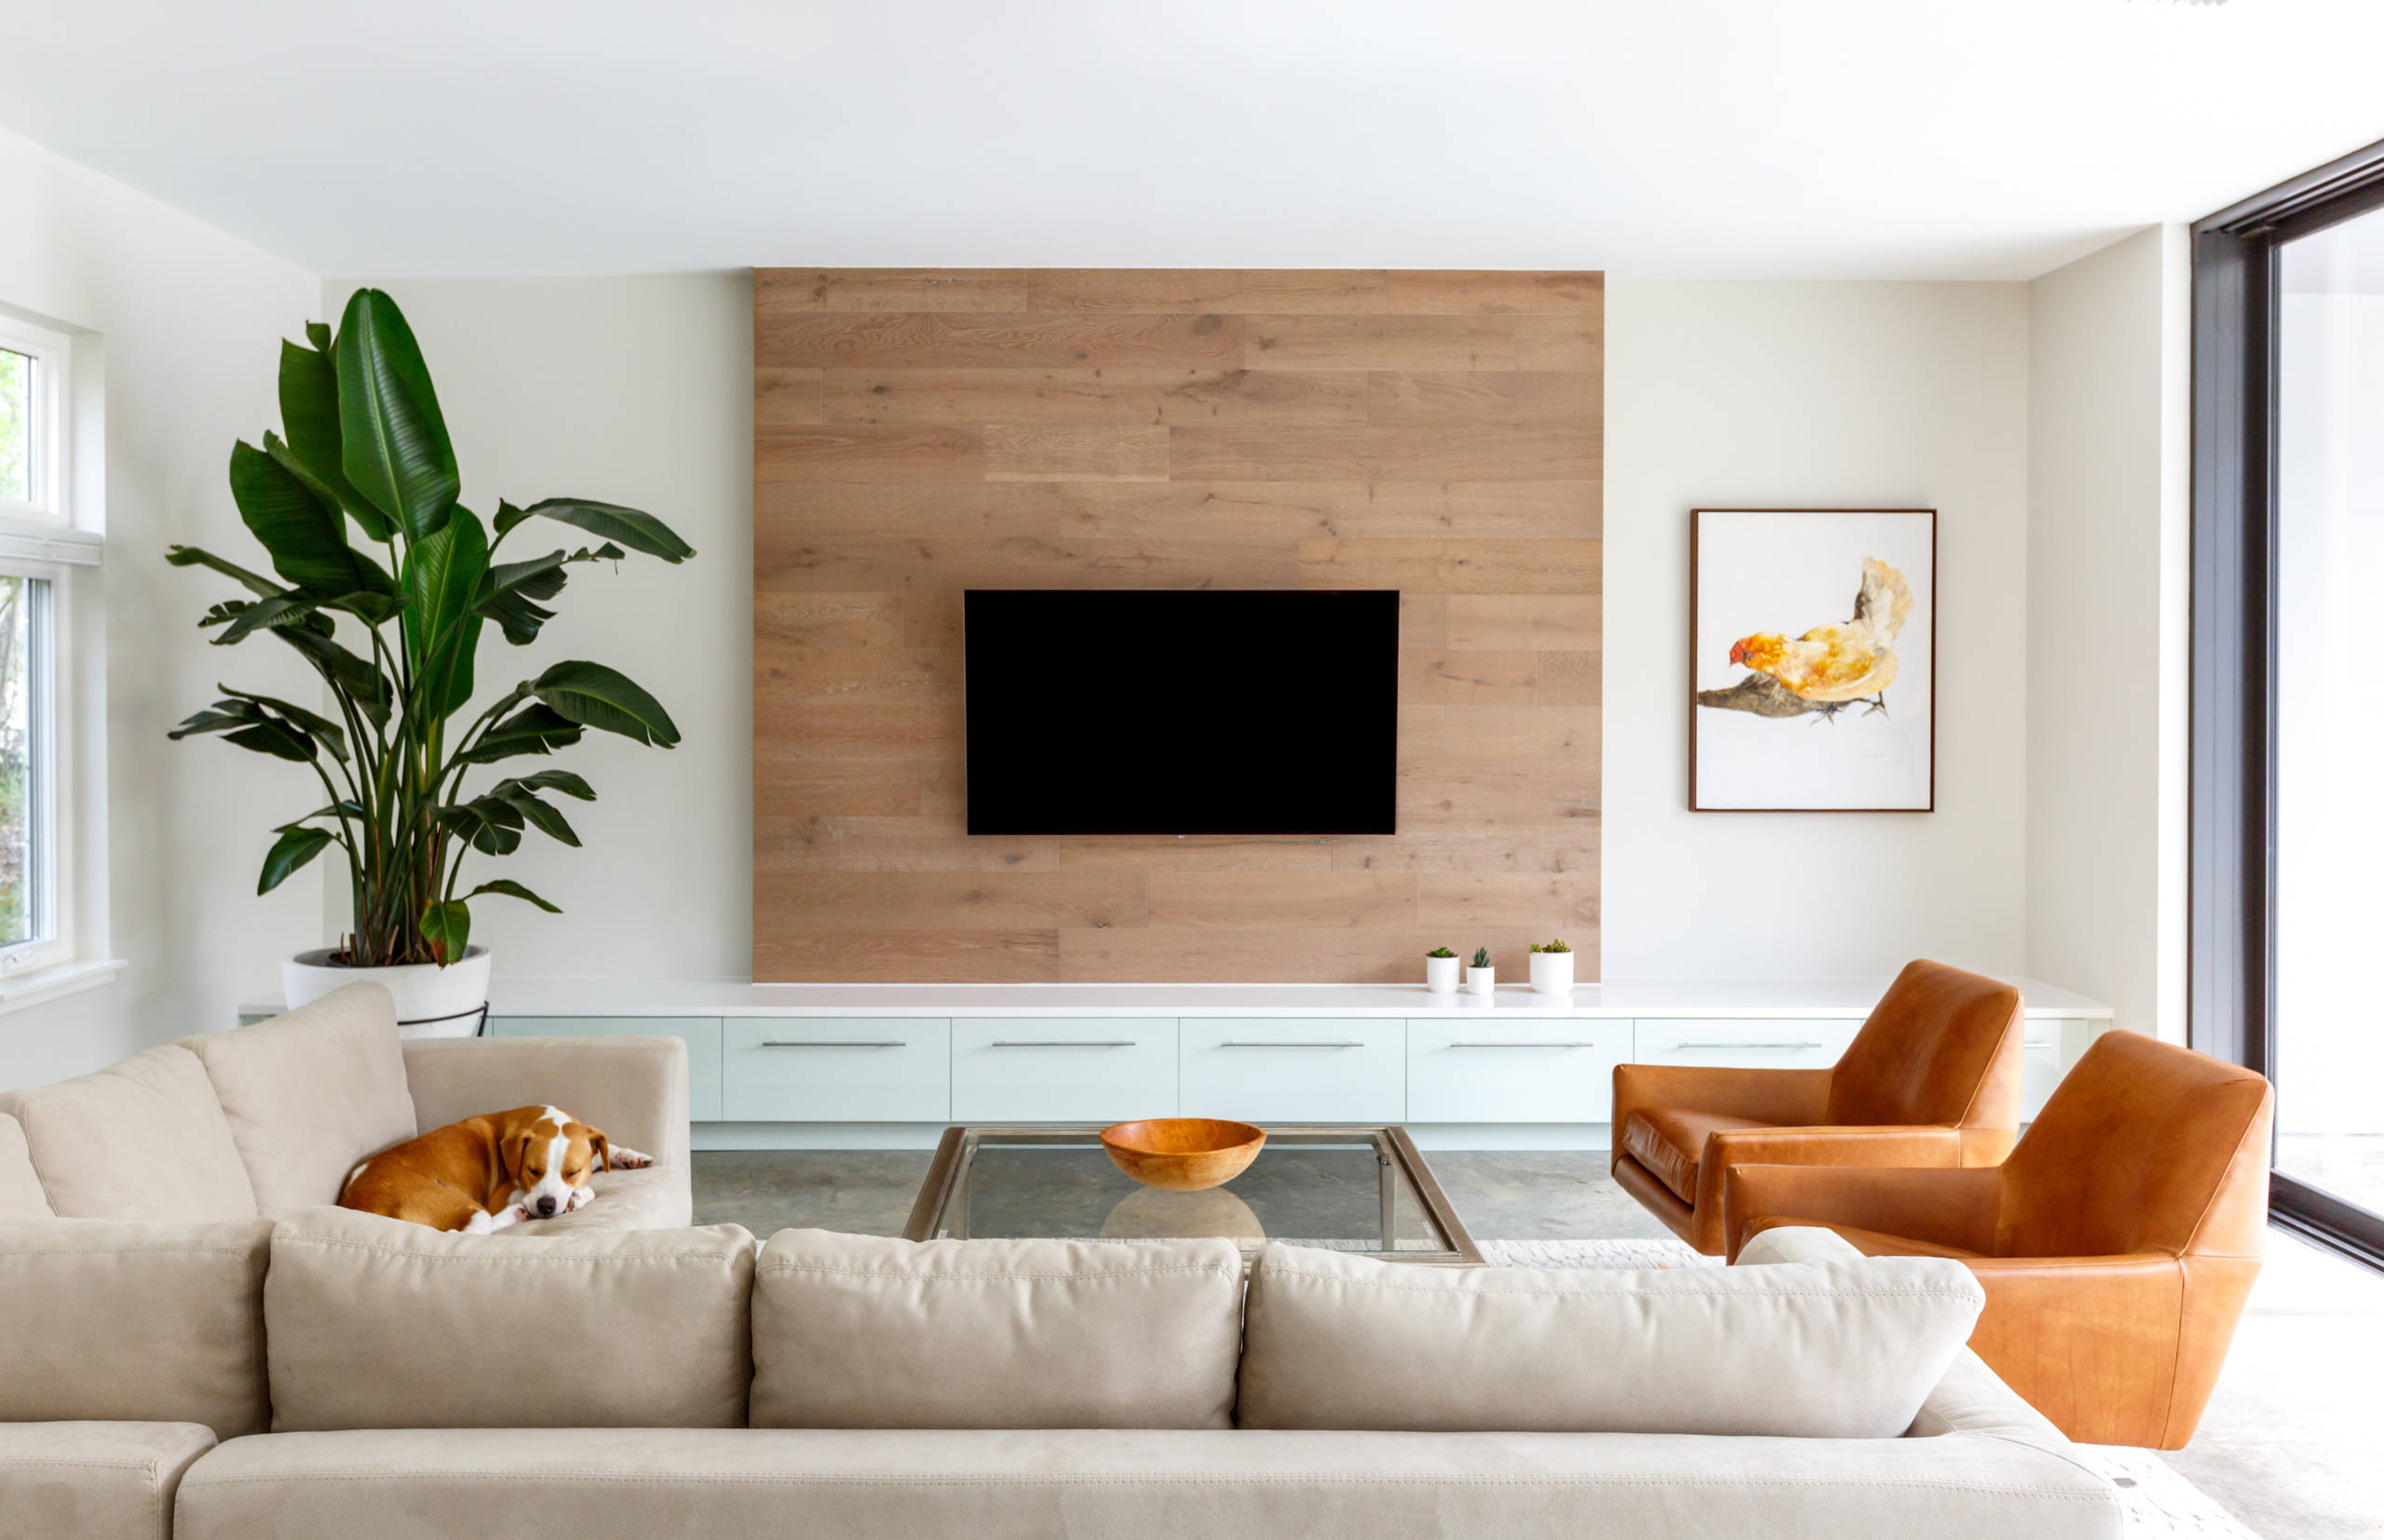 75 Enclosed Living Room Ideas You'll Love - April, 2023 | Houzz